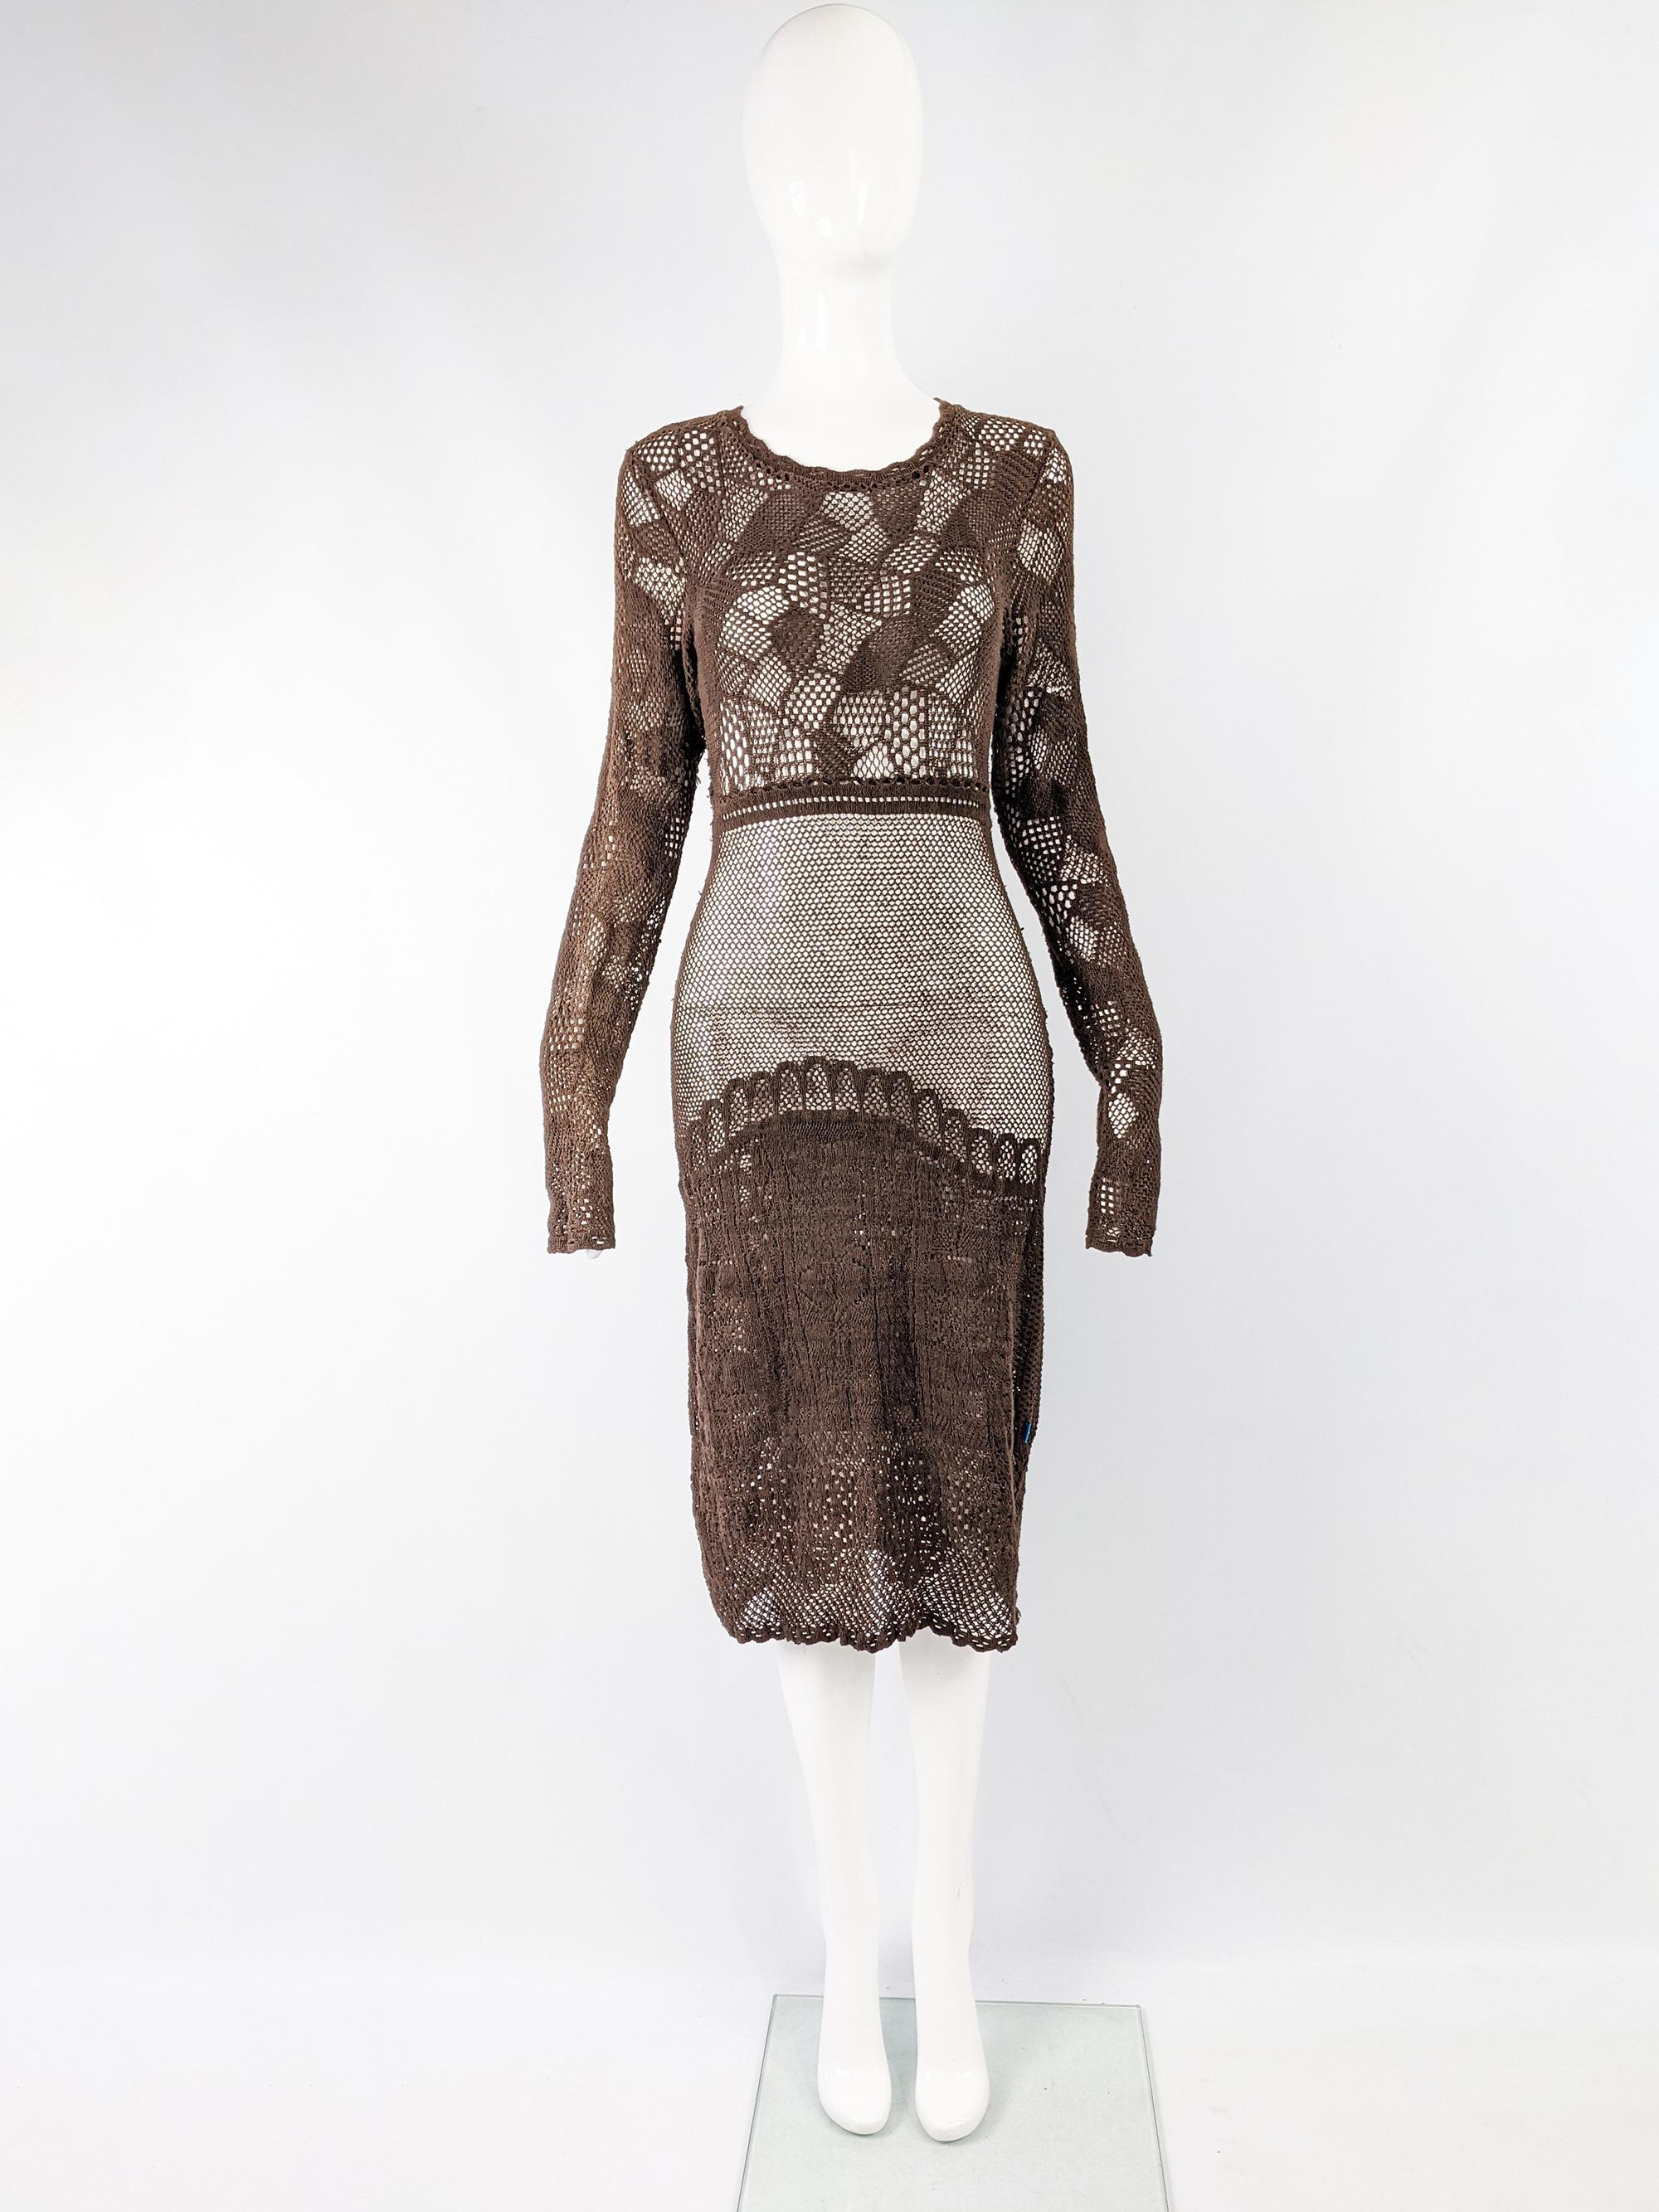 A beautiful vintage womens long sleeve dress from the 90s by luxury French fashion designer, Christian Lacroix. In a brown open knit crochet fabric which gives a beautiful sheer look - perfect for the summer. 

Size: Marked S
Bust - 34” / 86cm
Waist